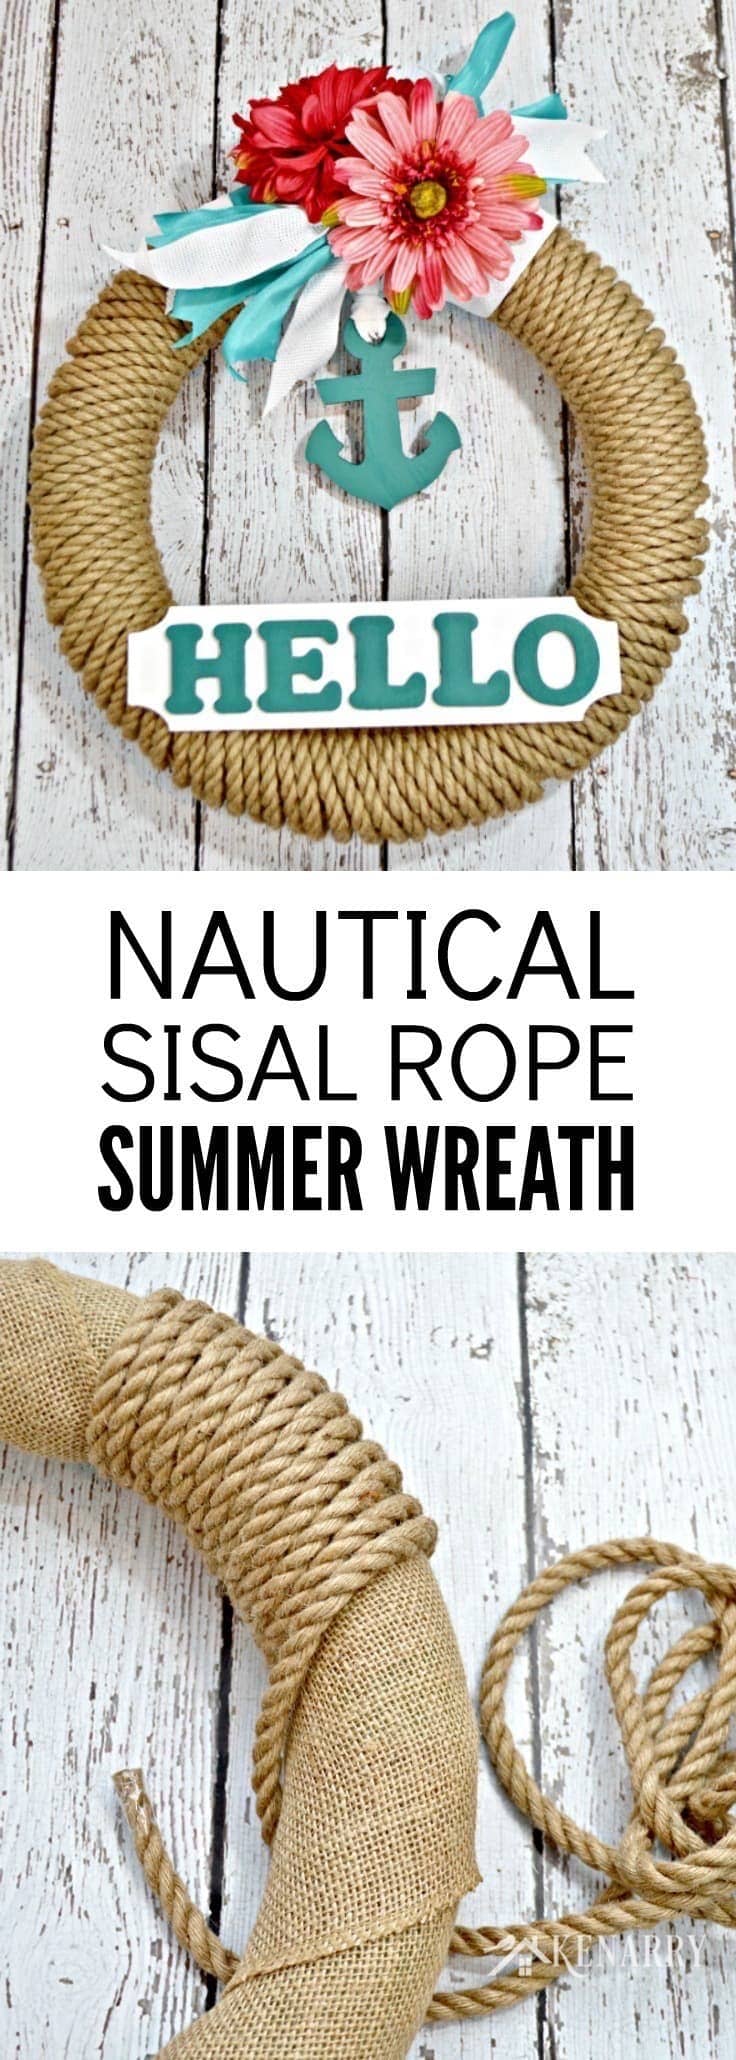 If you love to decorate your home or cottage with coastal decor, this Nautical Wreath using sisal rope and an anchor is an easy must-make craft idea for summer.